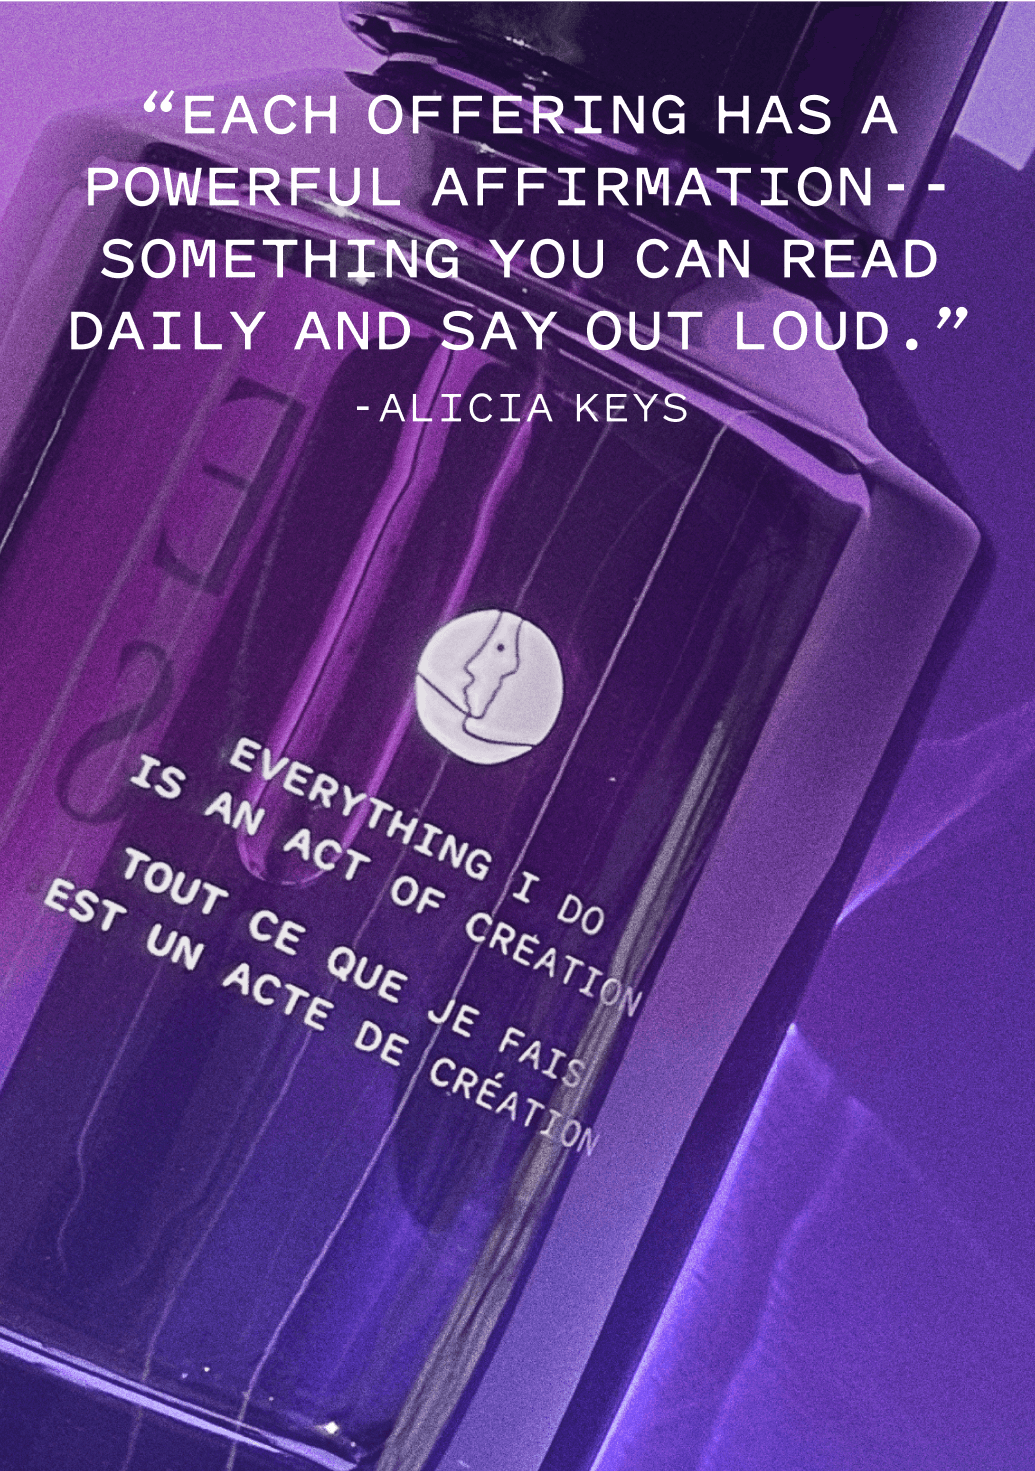 Each offering has a powerful affirmation--something you can read daily and say out loud. -Alicia Keys